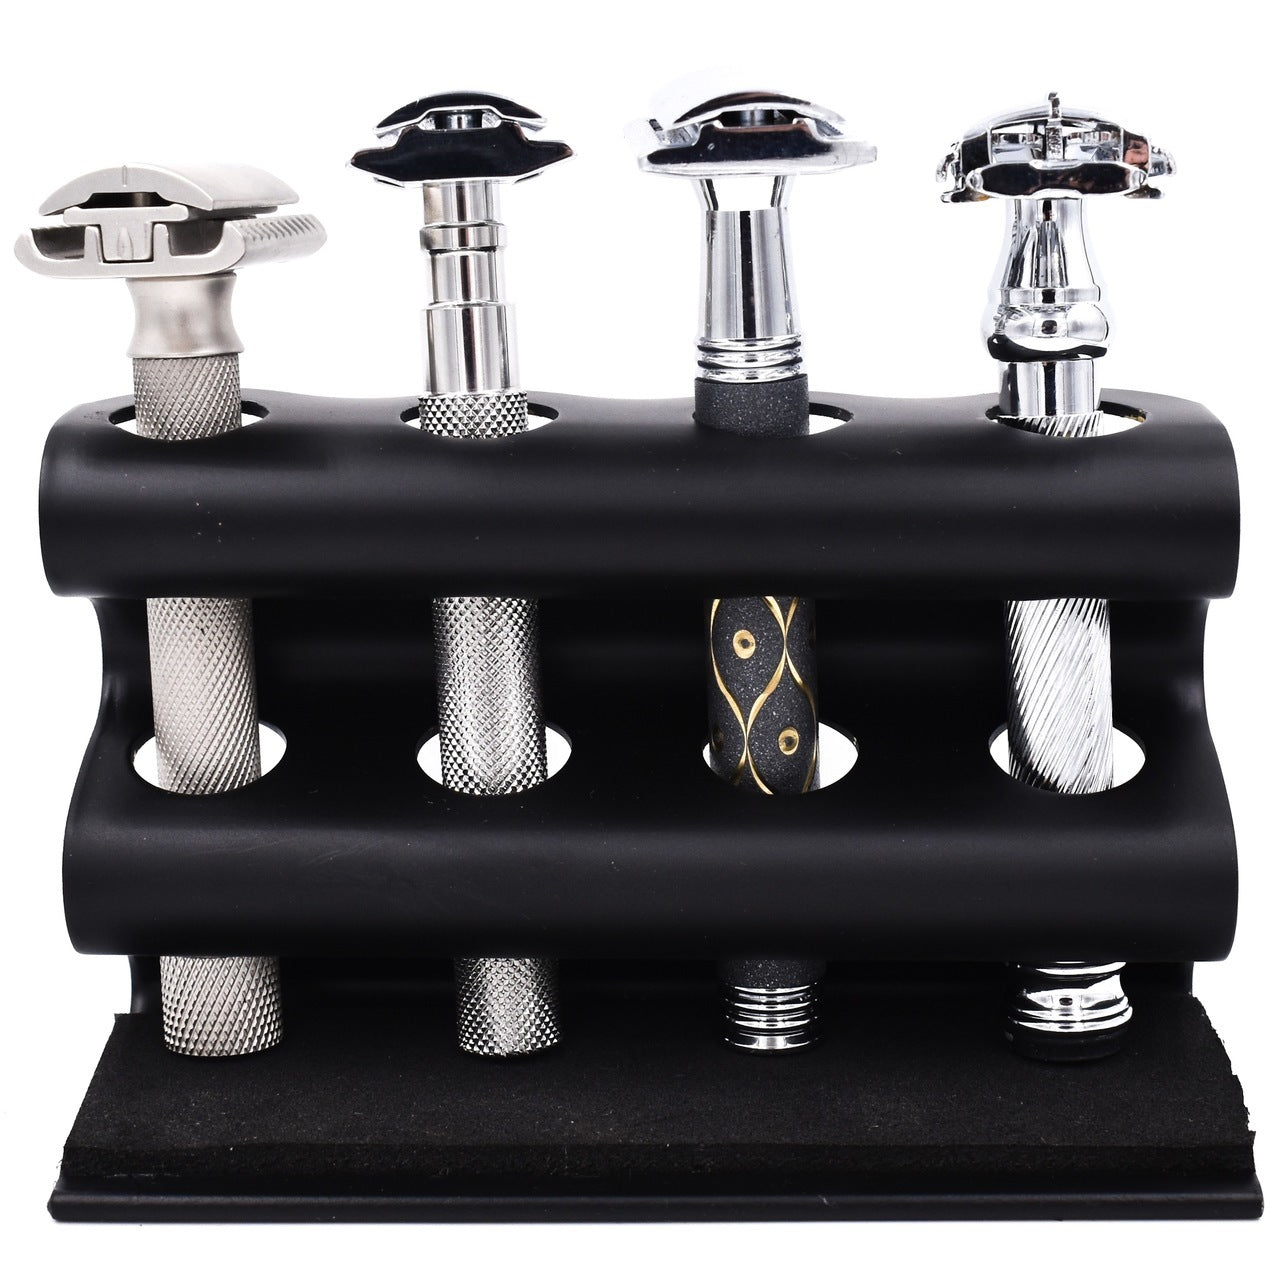 Parker Caddy 4 Razor Stand Black - Cyril R. Salter | Trade Suppliers of Gentlemen's Grooming Products